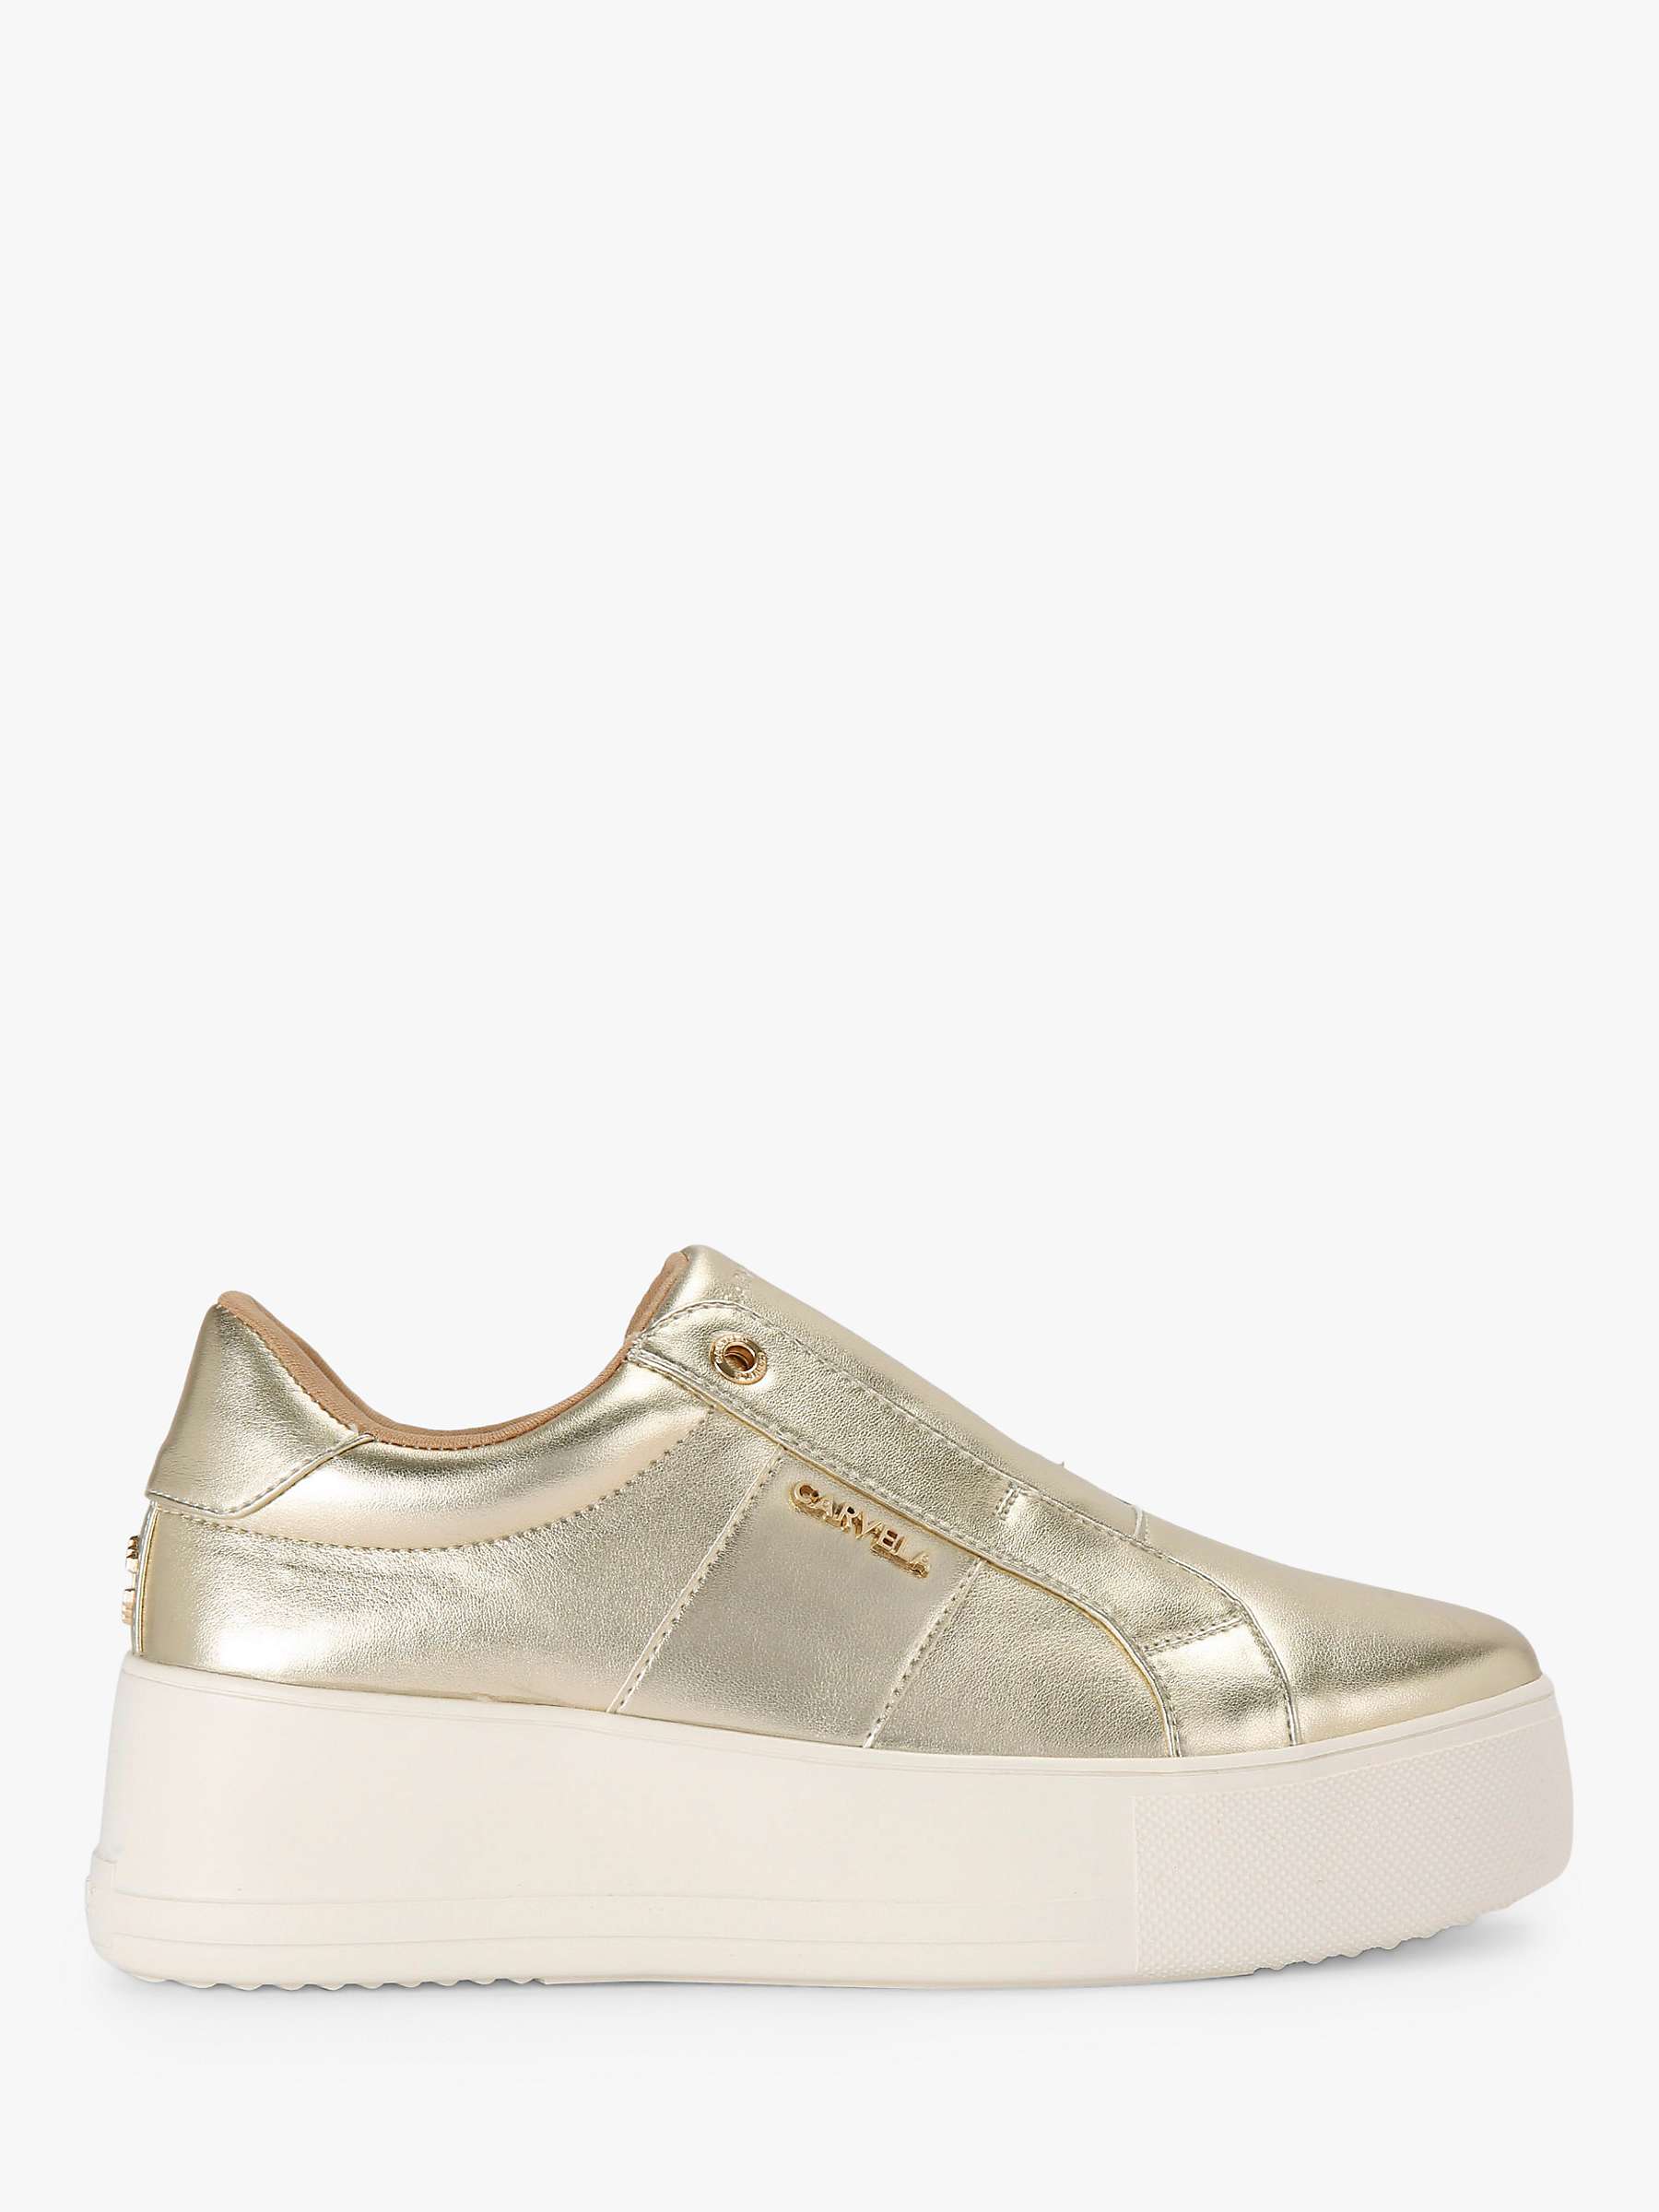 Buy Carvela Jive 2 Laceless Trainers, Gold Online at johnlewis.com